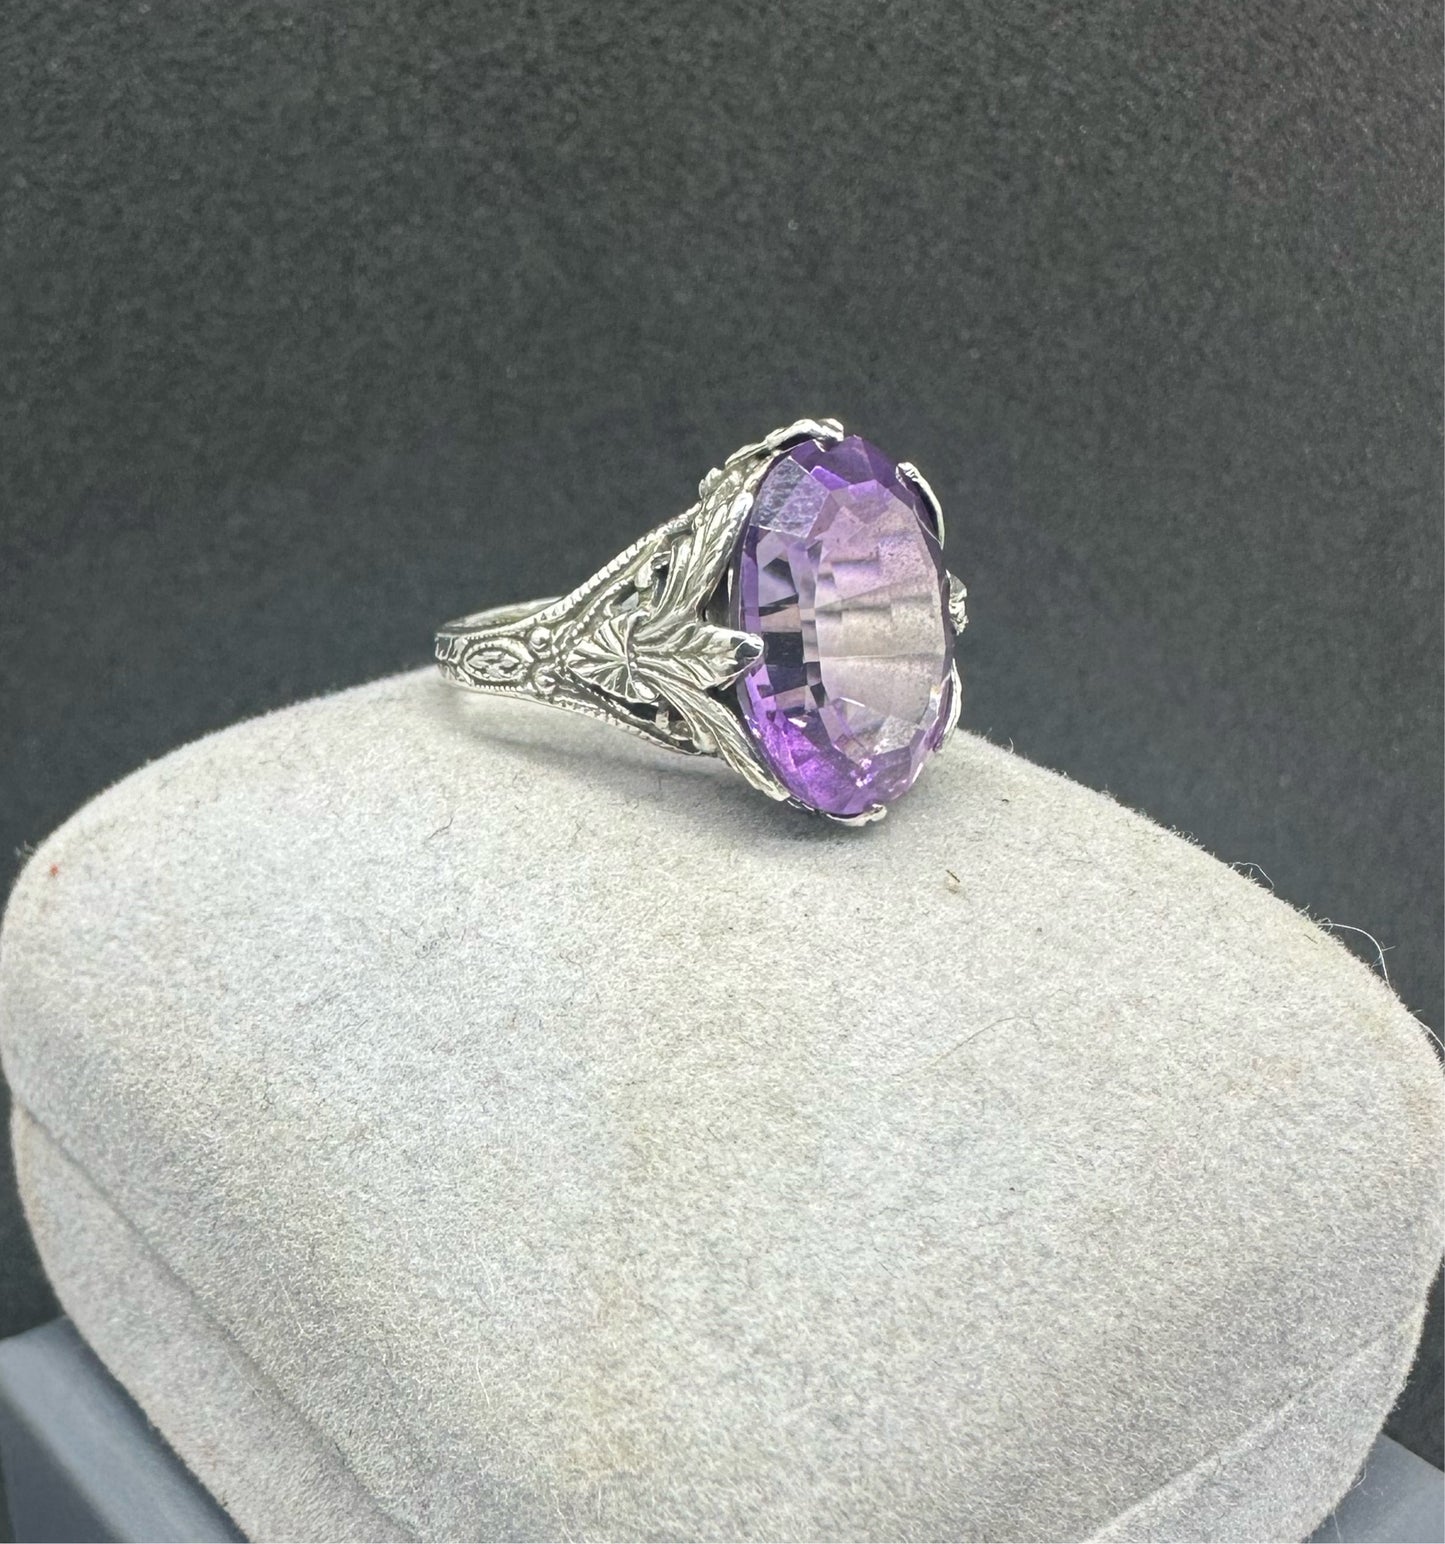 Vintage Sterling Silver .925 Oval Amethyst Ring w/ Ornate Detailed Band Size 6.25